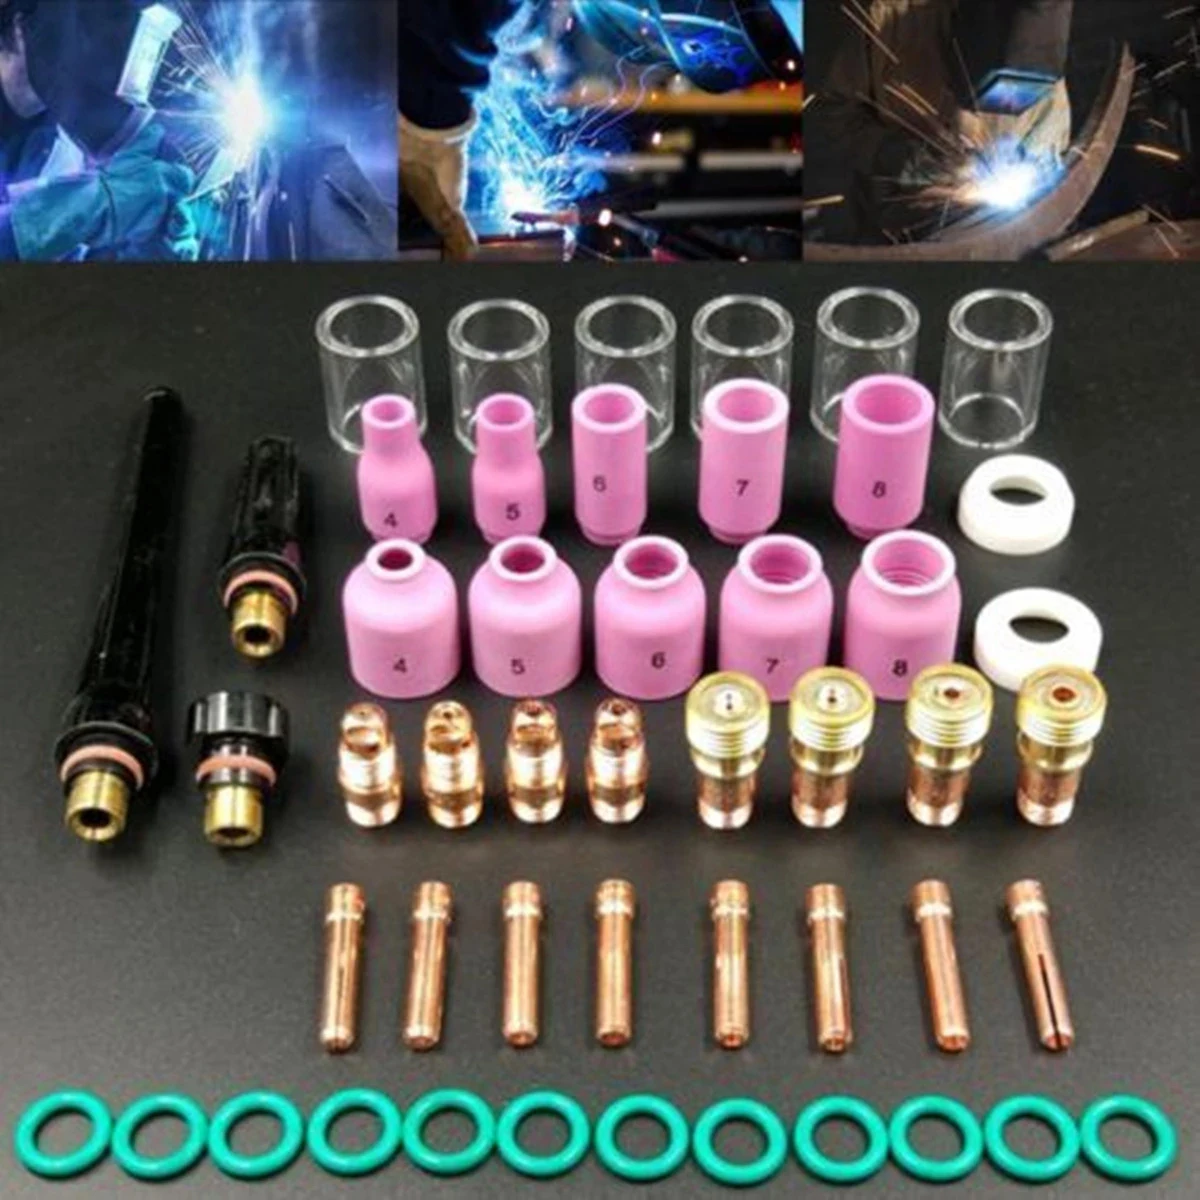 

49pcs/set TIG Welding Torch Accessories Kit Alumina Nozzle Stubby Gas Lens 10 Pyrex Cup Kit For TIG WP-17/18/26 Tool Accessories